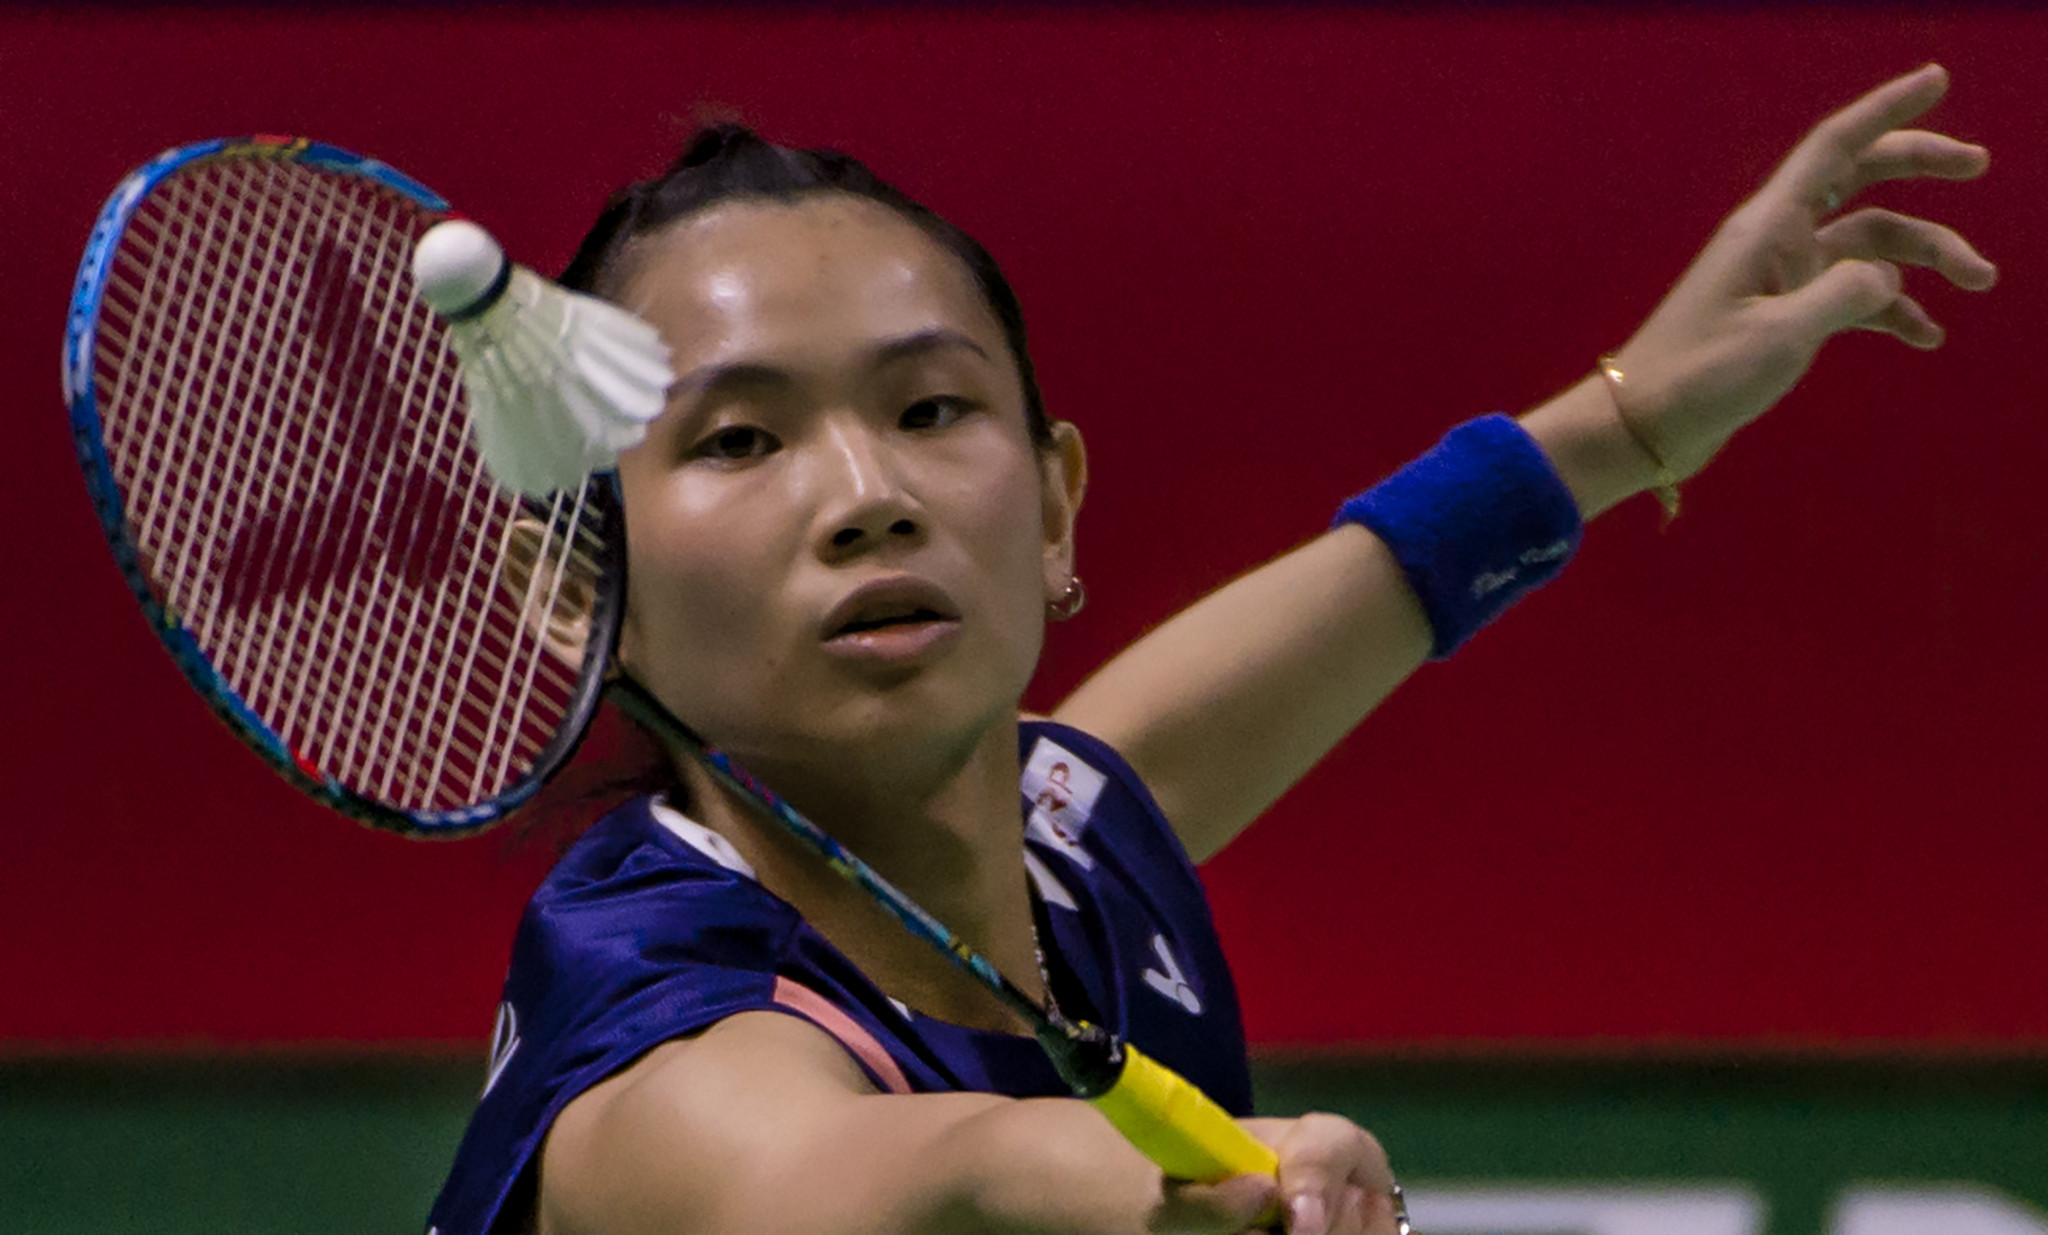 Tai Tzu Ying won her semi-final at the BWF Indonesia Open today ©Getty Images